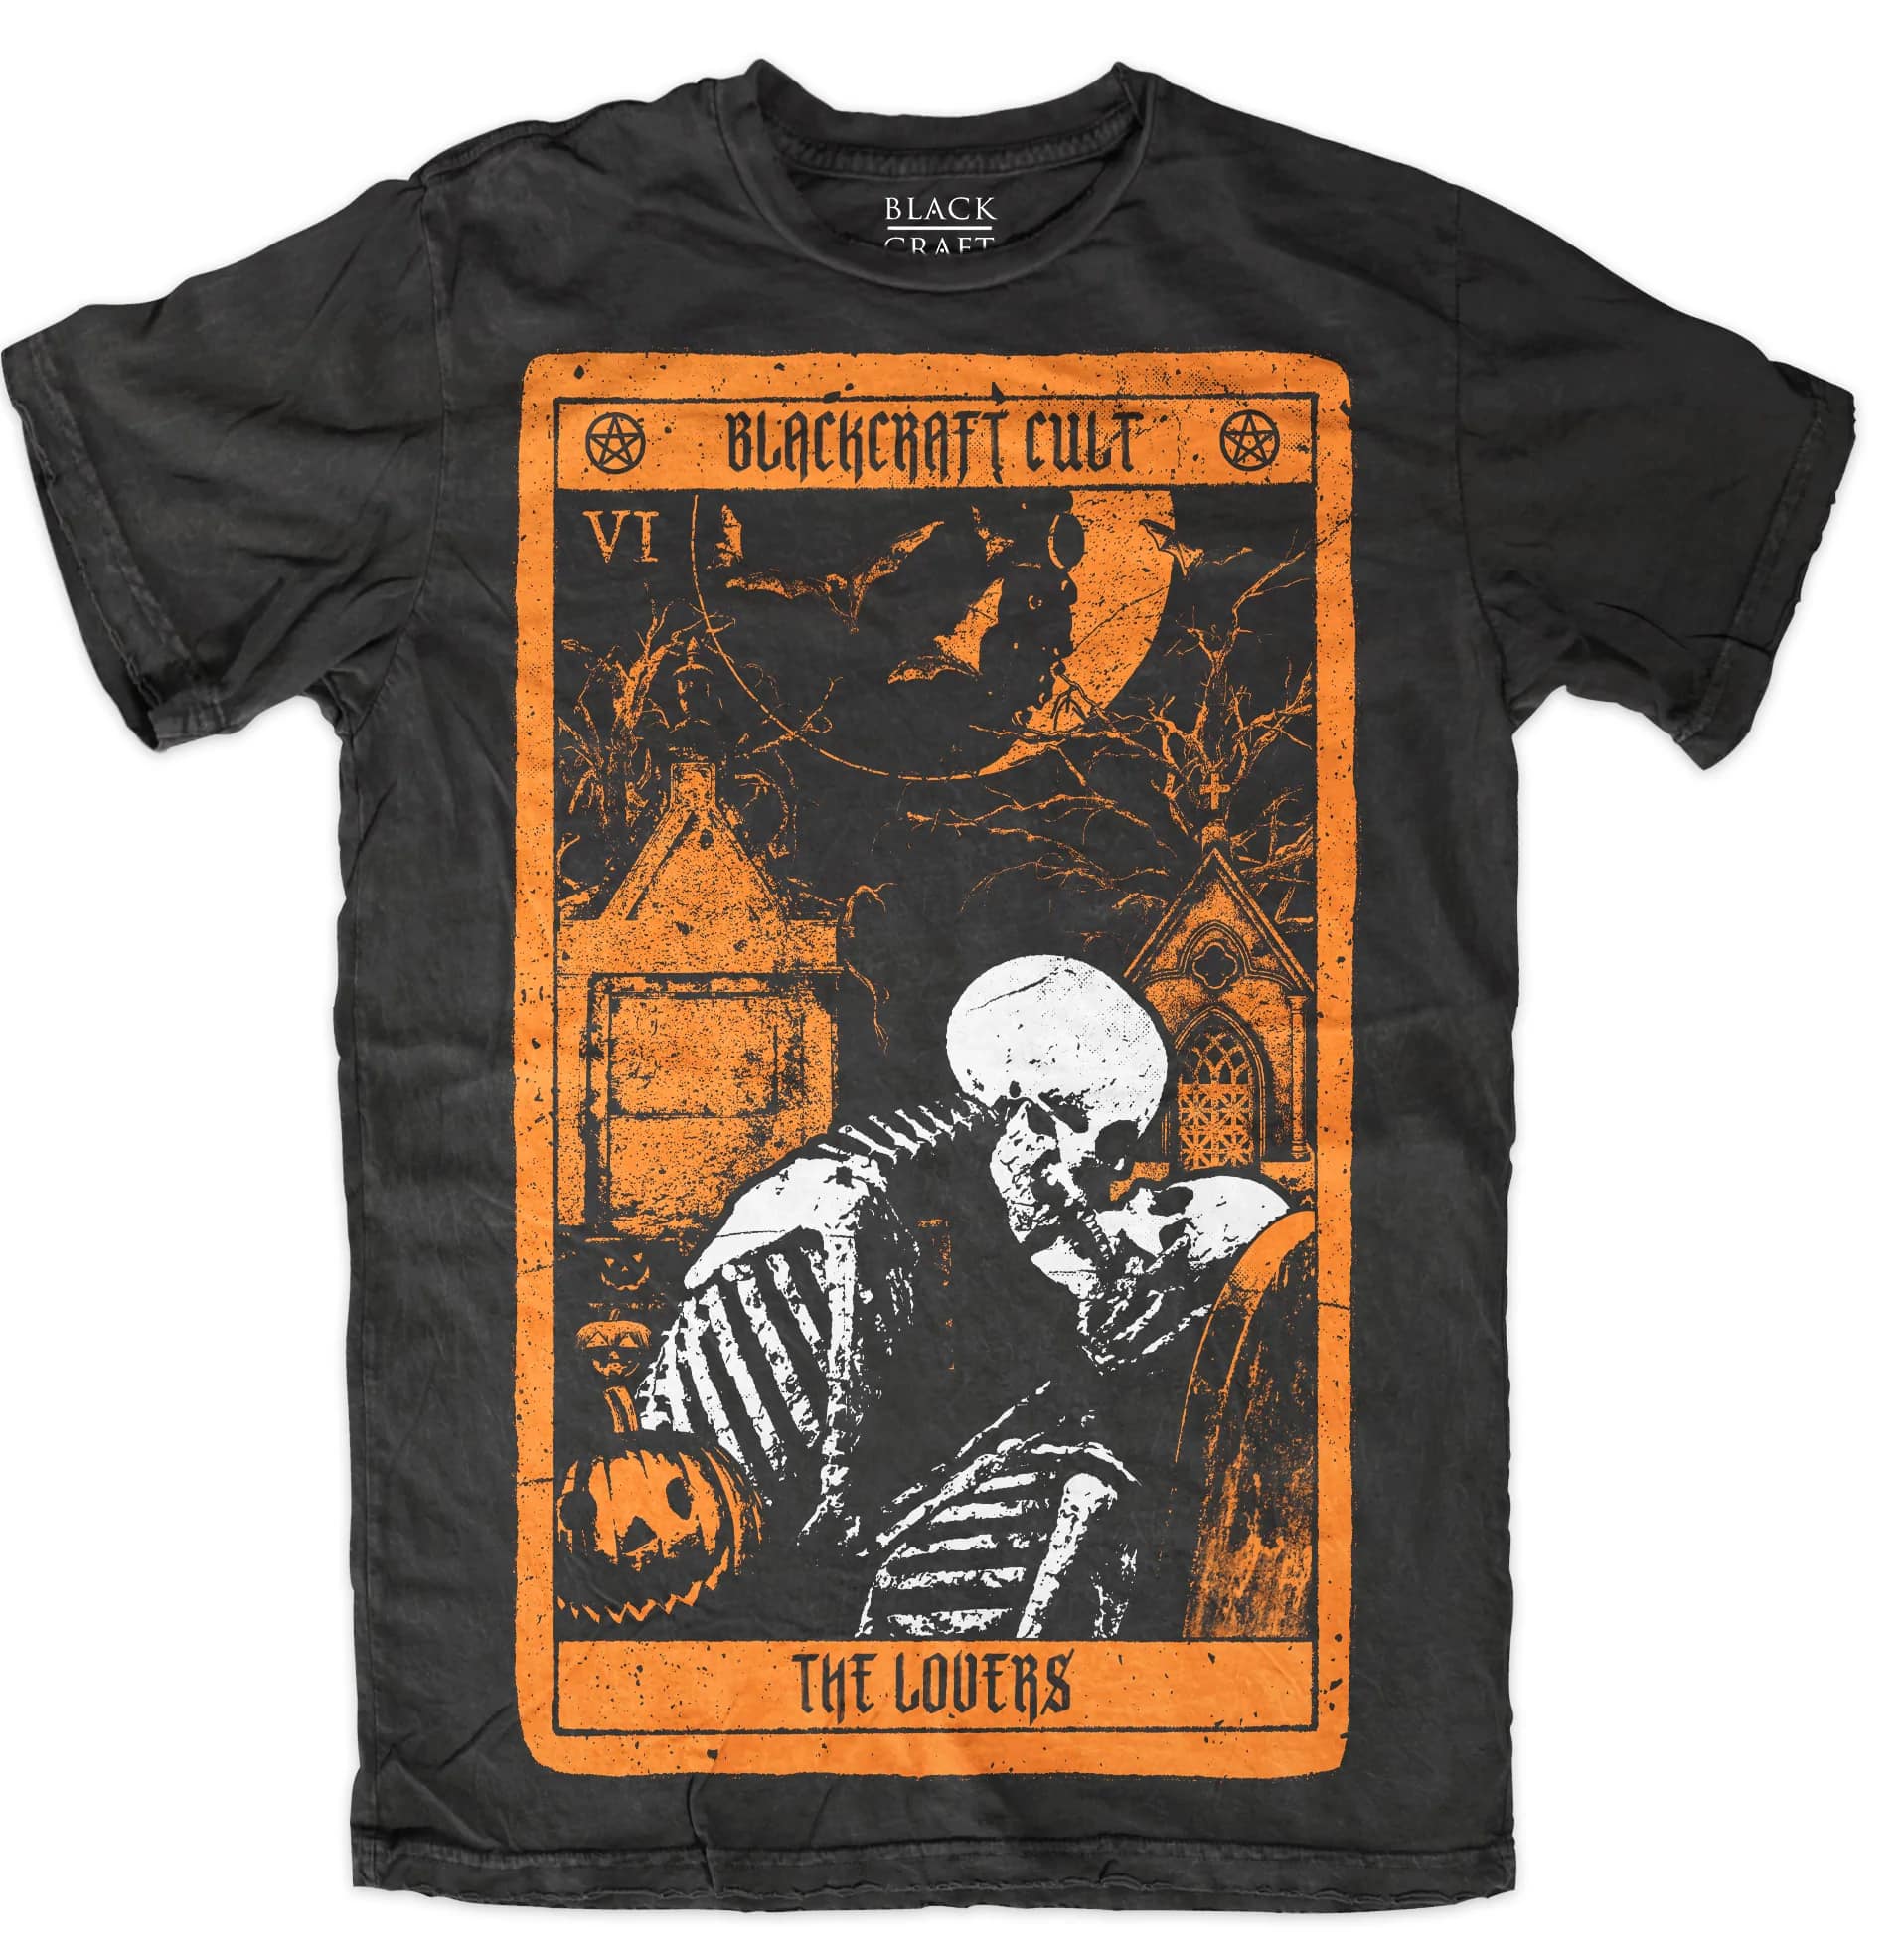 black shirt depicts blackcraft cult "the lovers" tarot card with two skeletons kissing